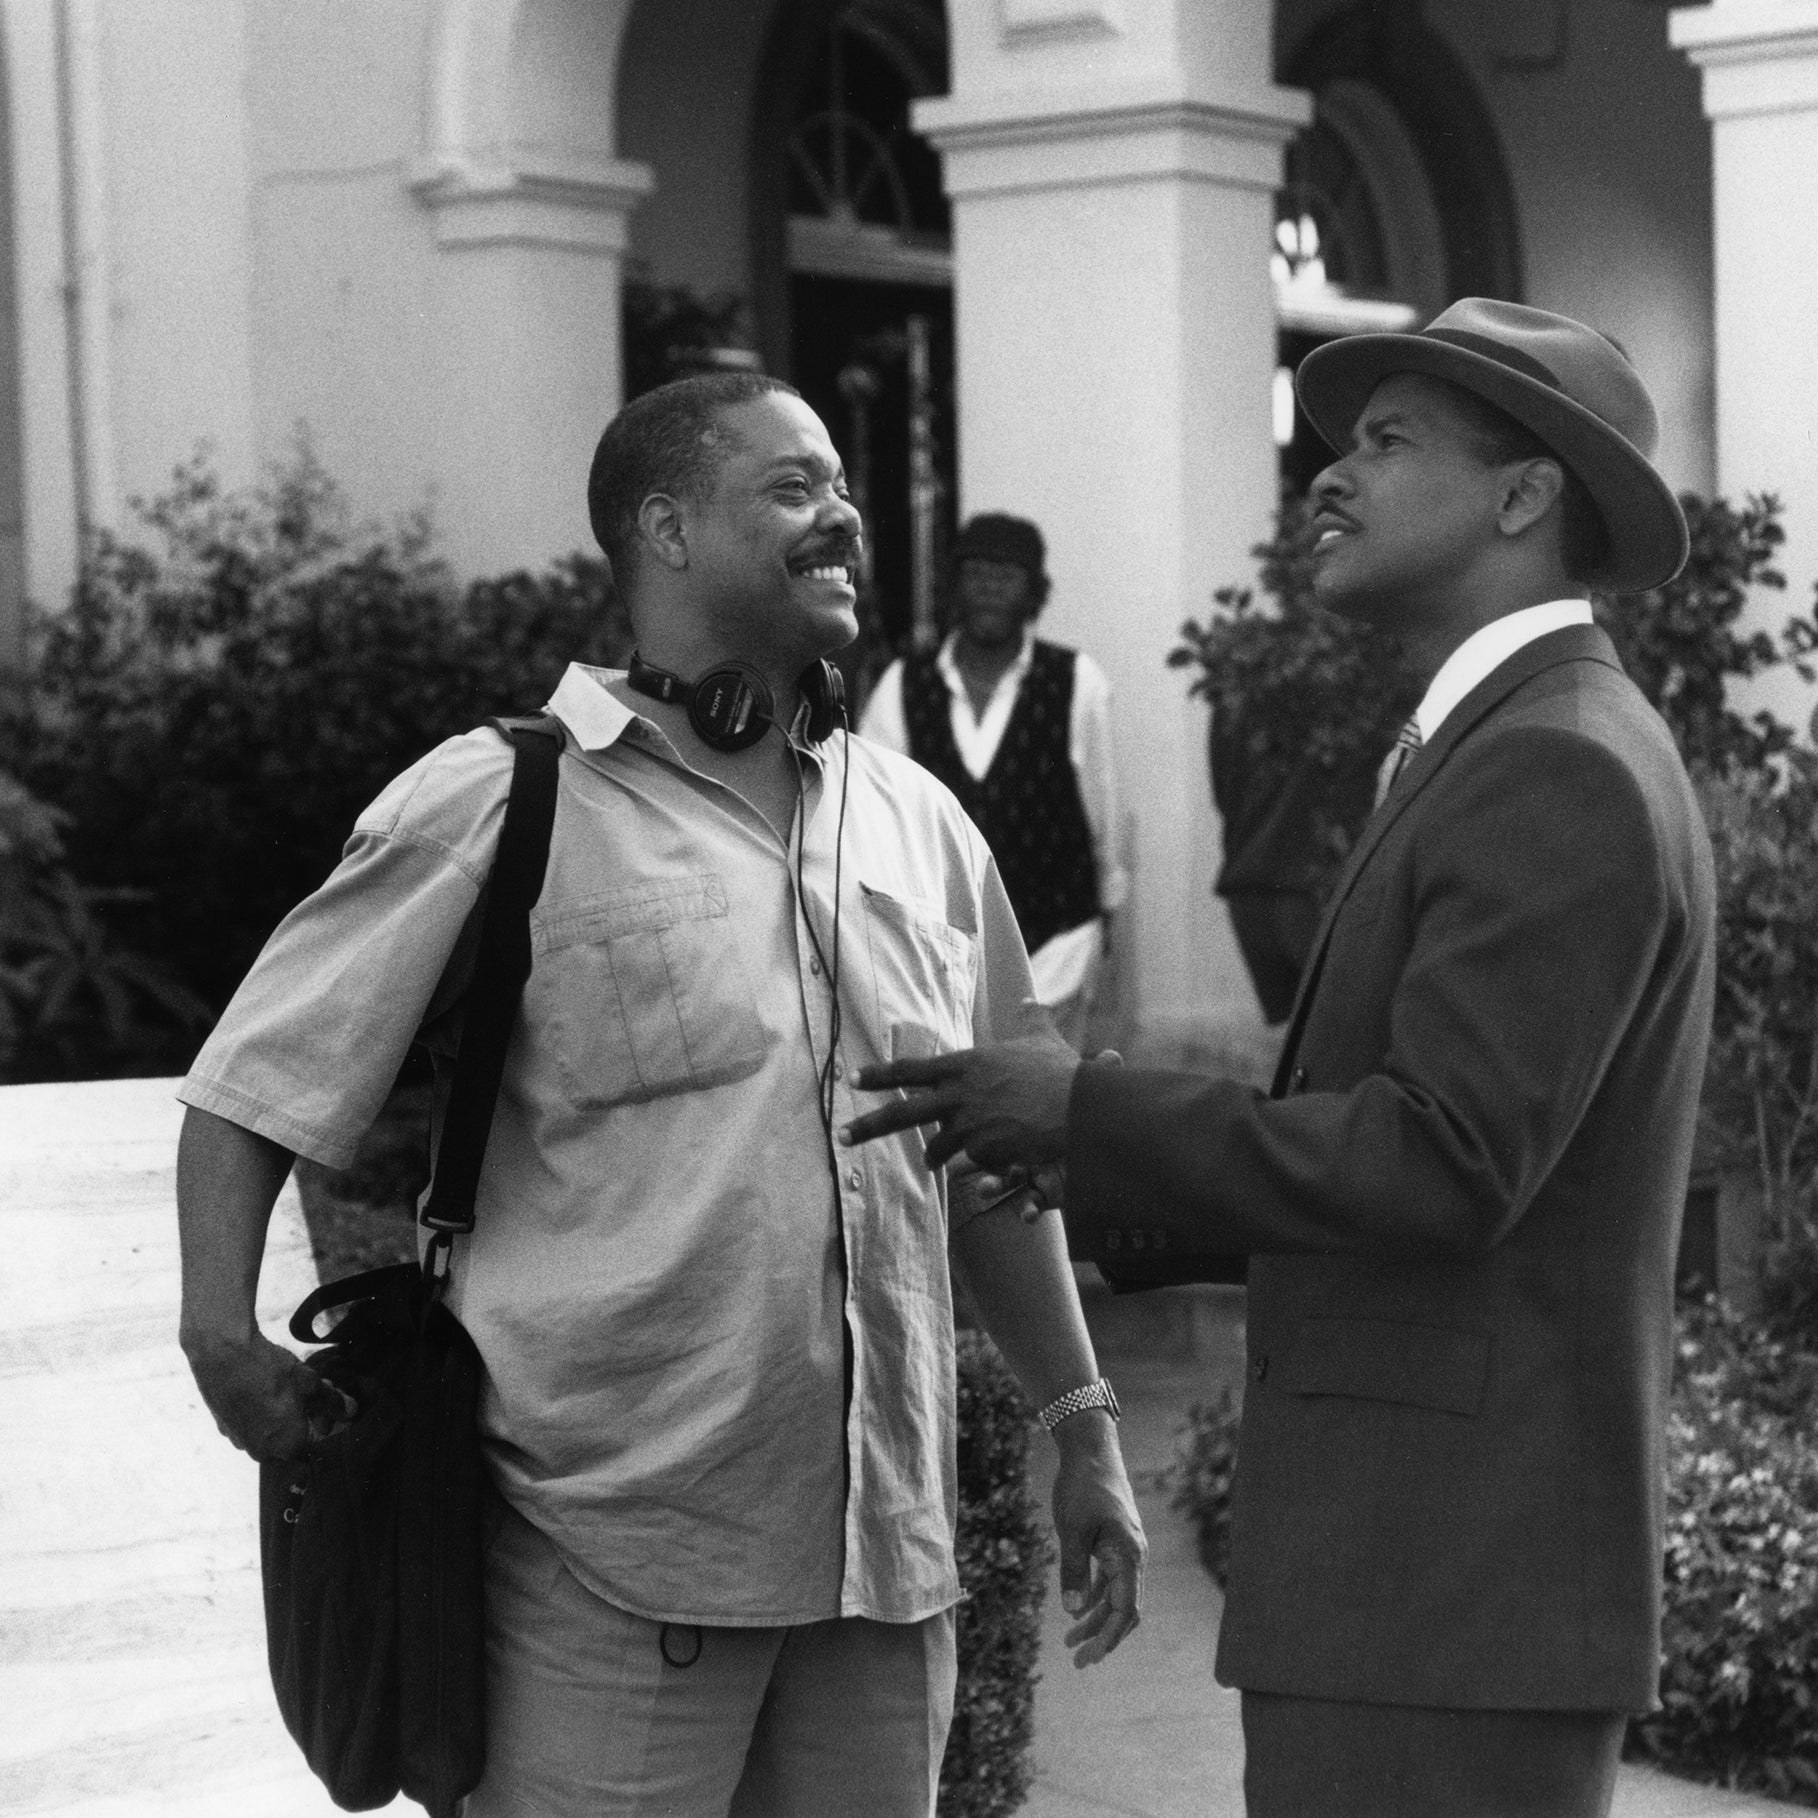 Two men talking on a movie set, one the director, the other an actor in costume.